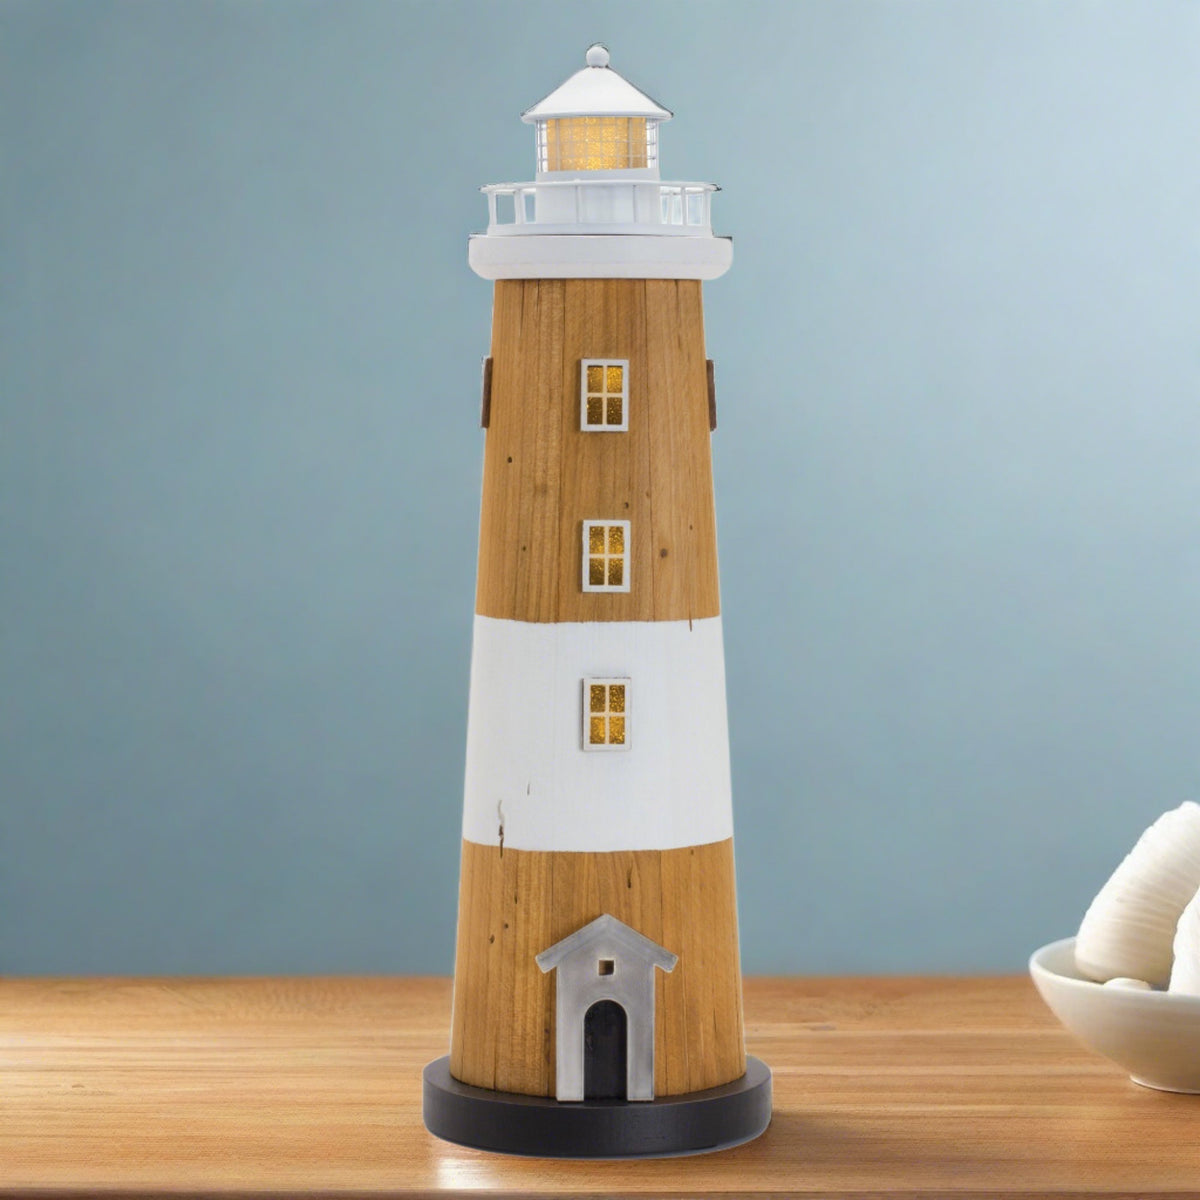 Wooden Lighthouse with Real Lights!